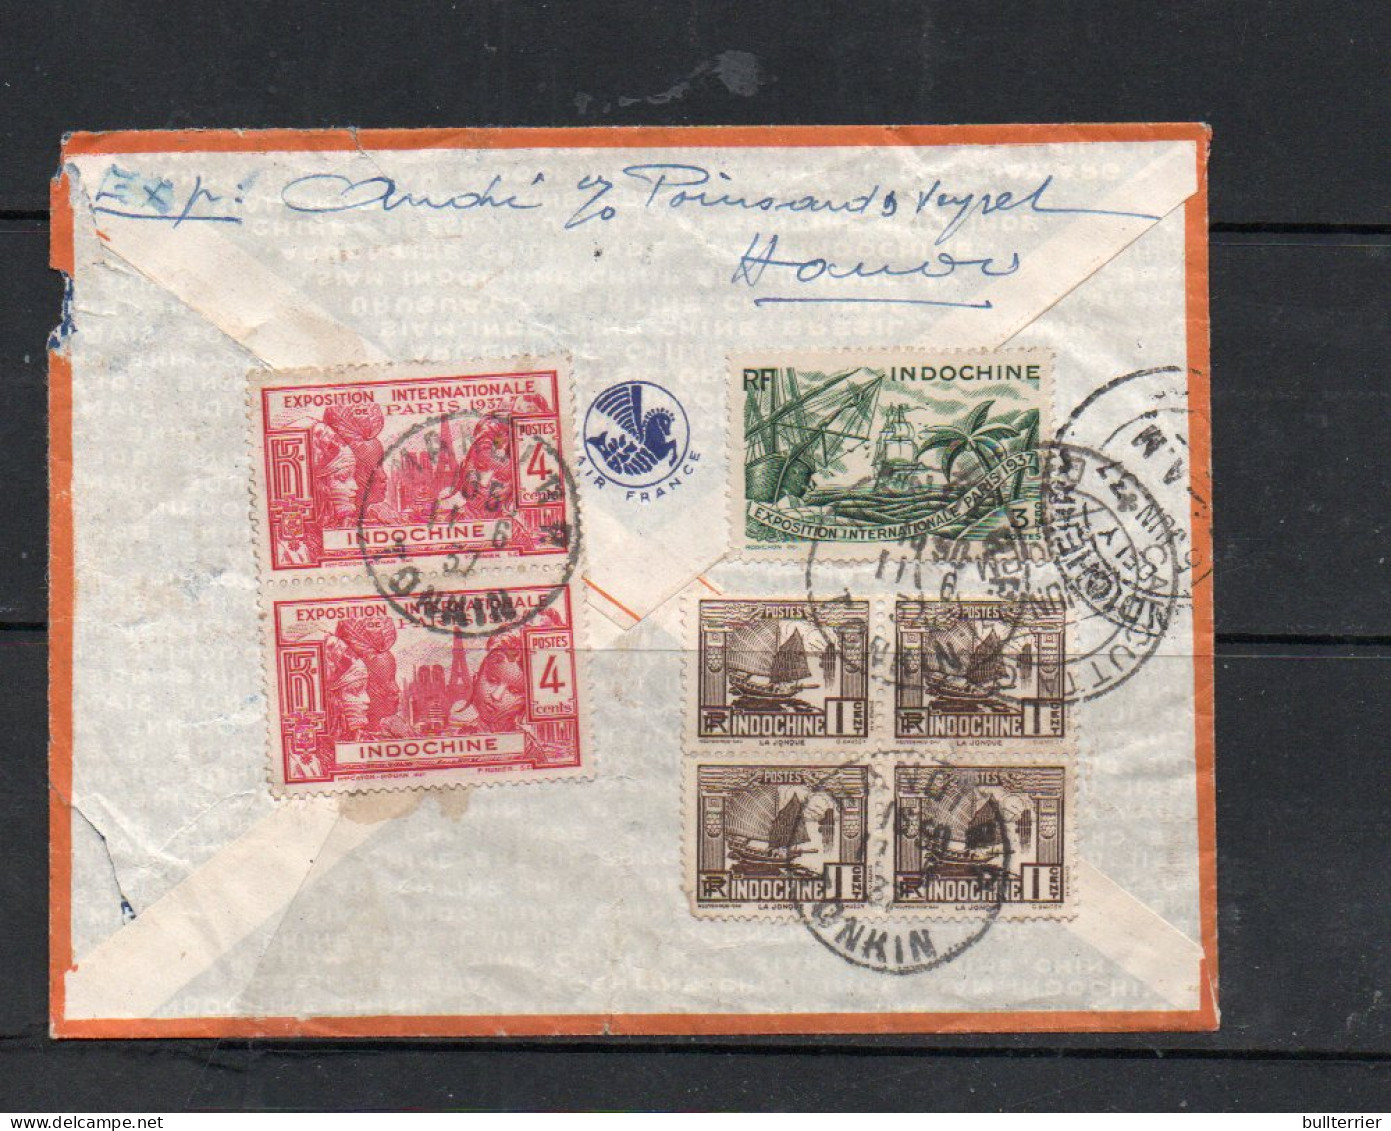 INDOCHINA - 1937 - AIRMAIL COVER HANOI TO PONDICHERRY FRENCH INDIA WITH BACKSTAMPS - Luchtpost